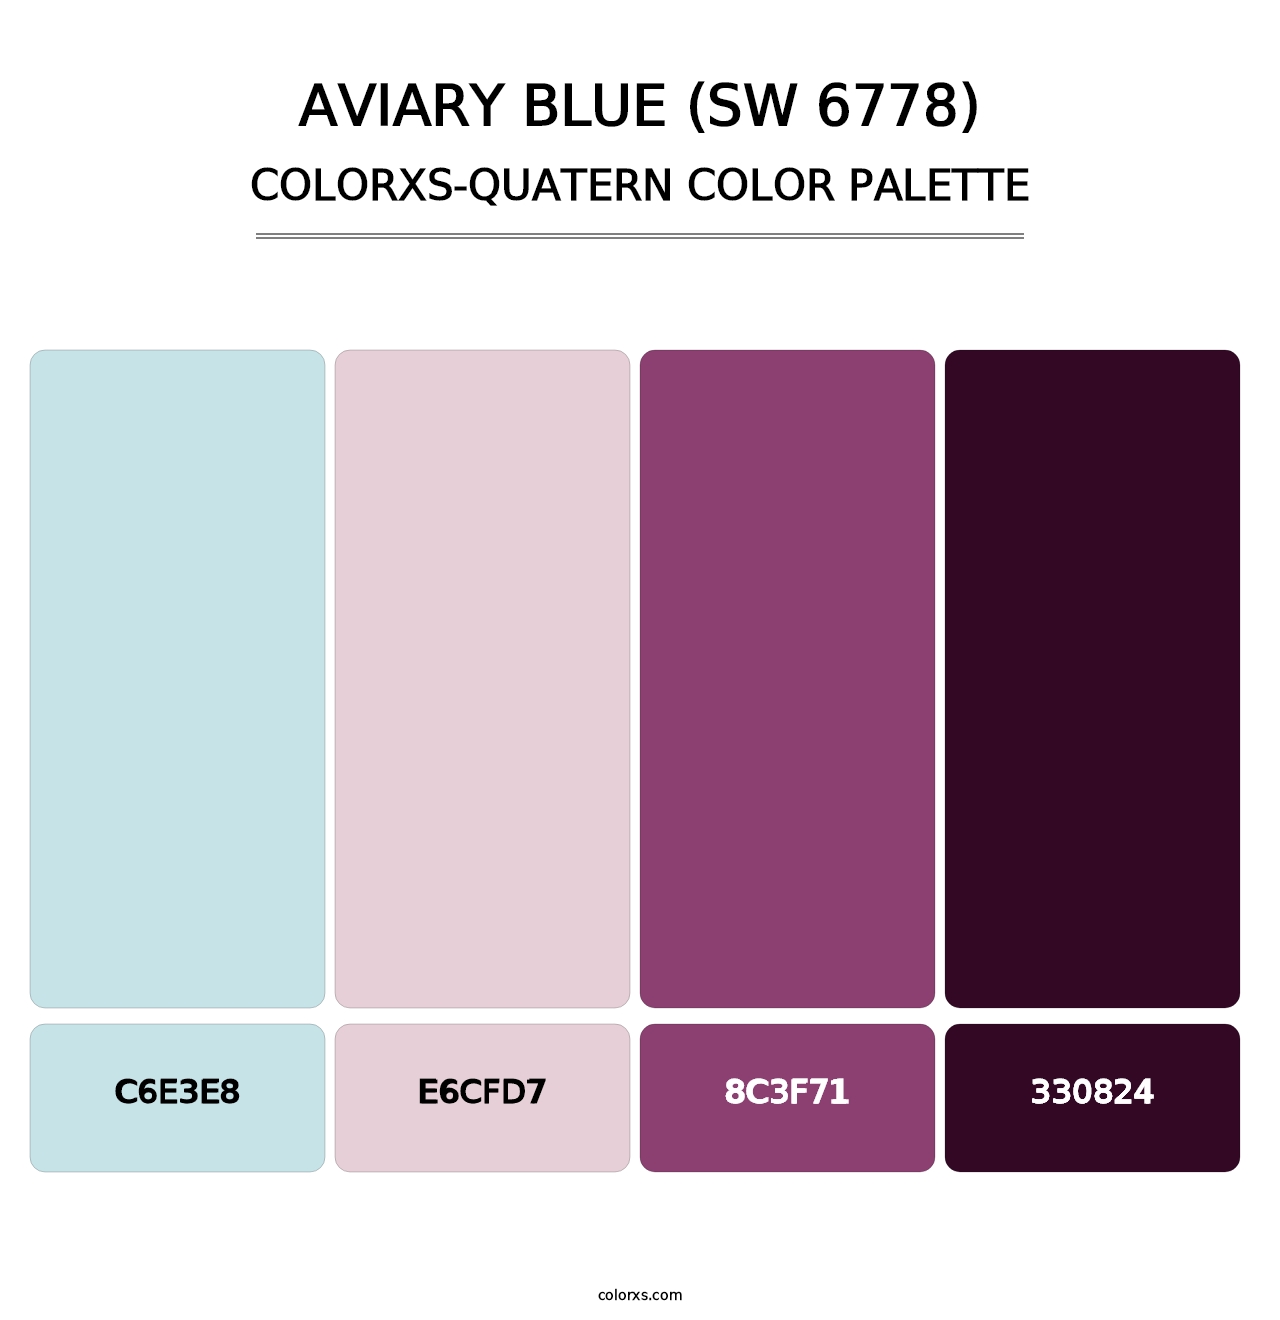 Aviary Blue (SW 6778) - Colorxs Quatern Palette